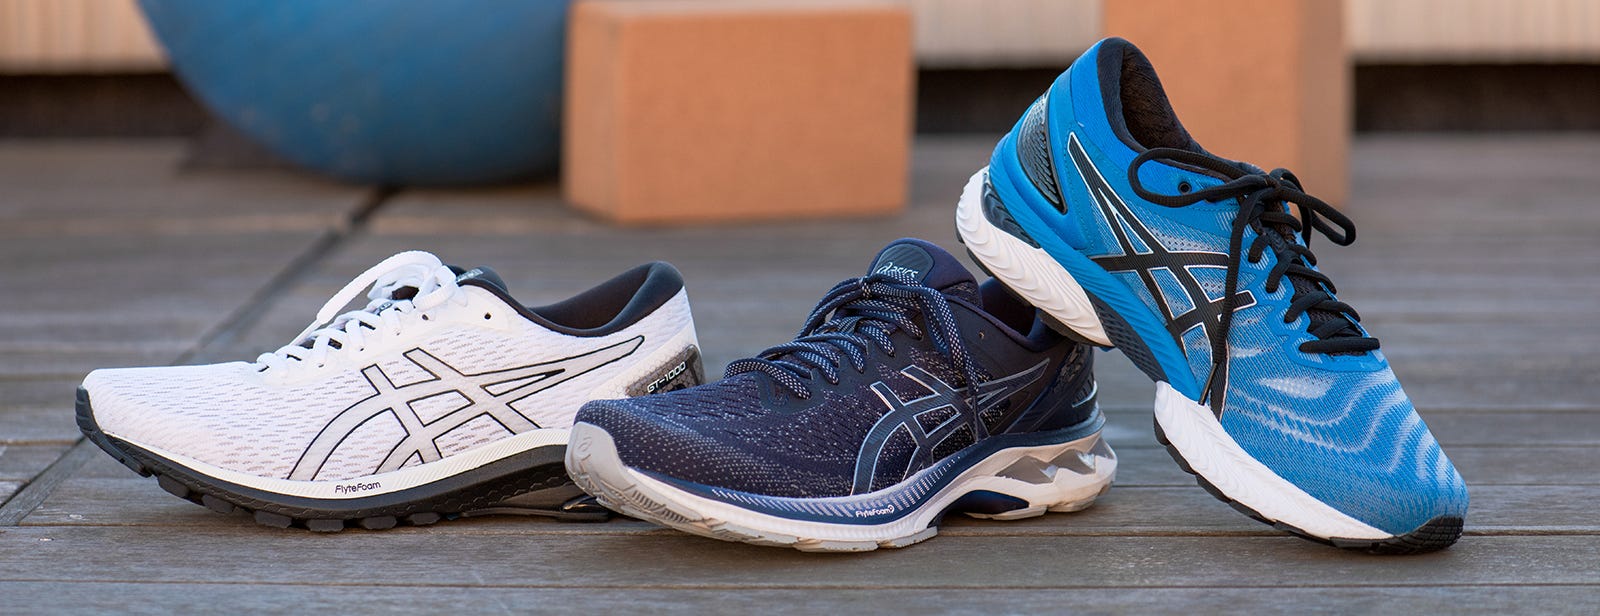 What Is The Difference Between Running And Training Shoes?